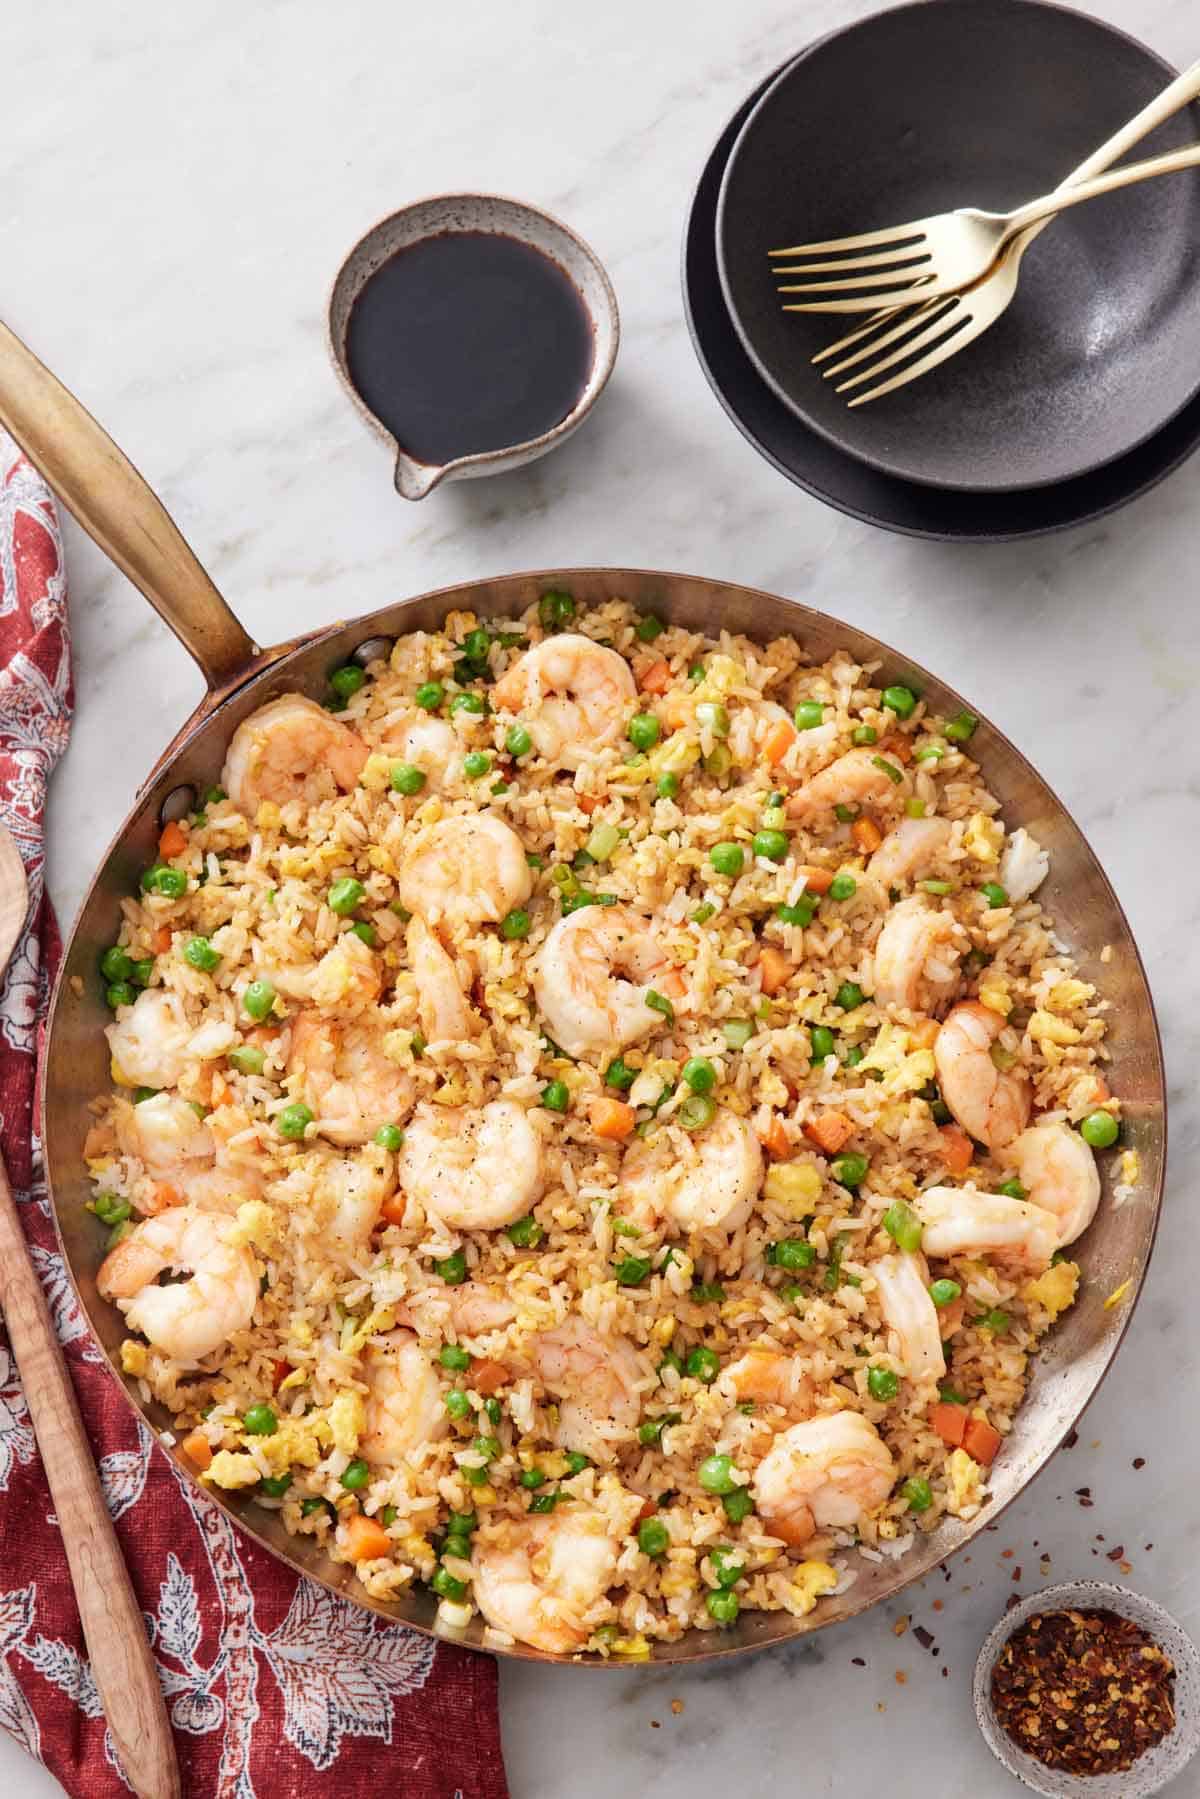 An overhead view of a skillet of shrimp fried rice with a stack of bowls, forks, some soy sauce, and some red pepper flakes off to the side.